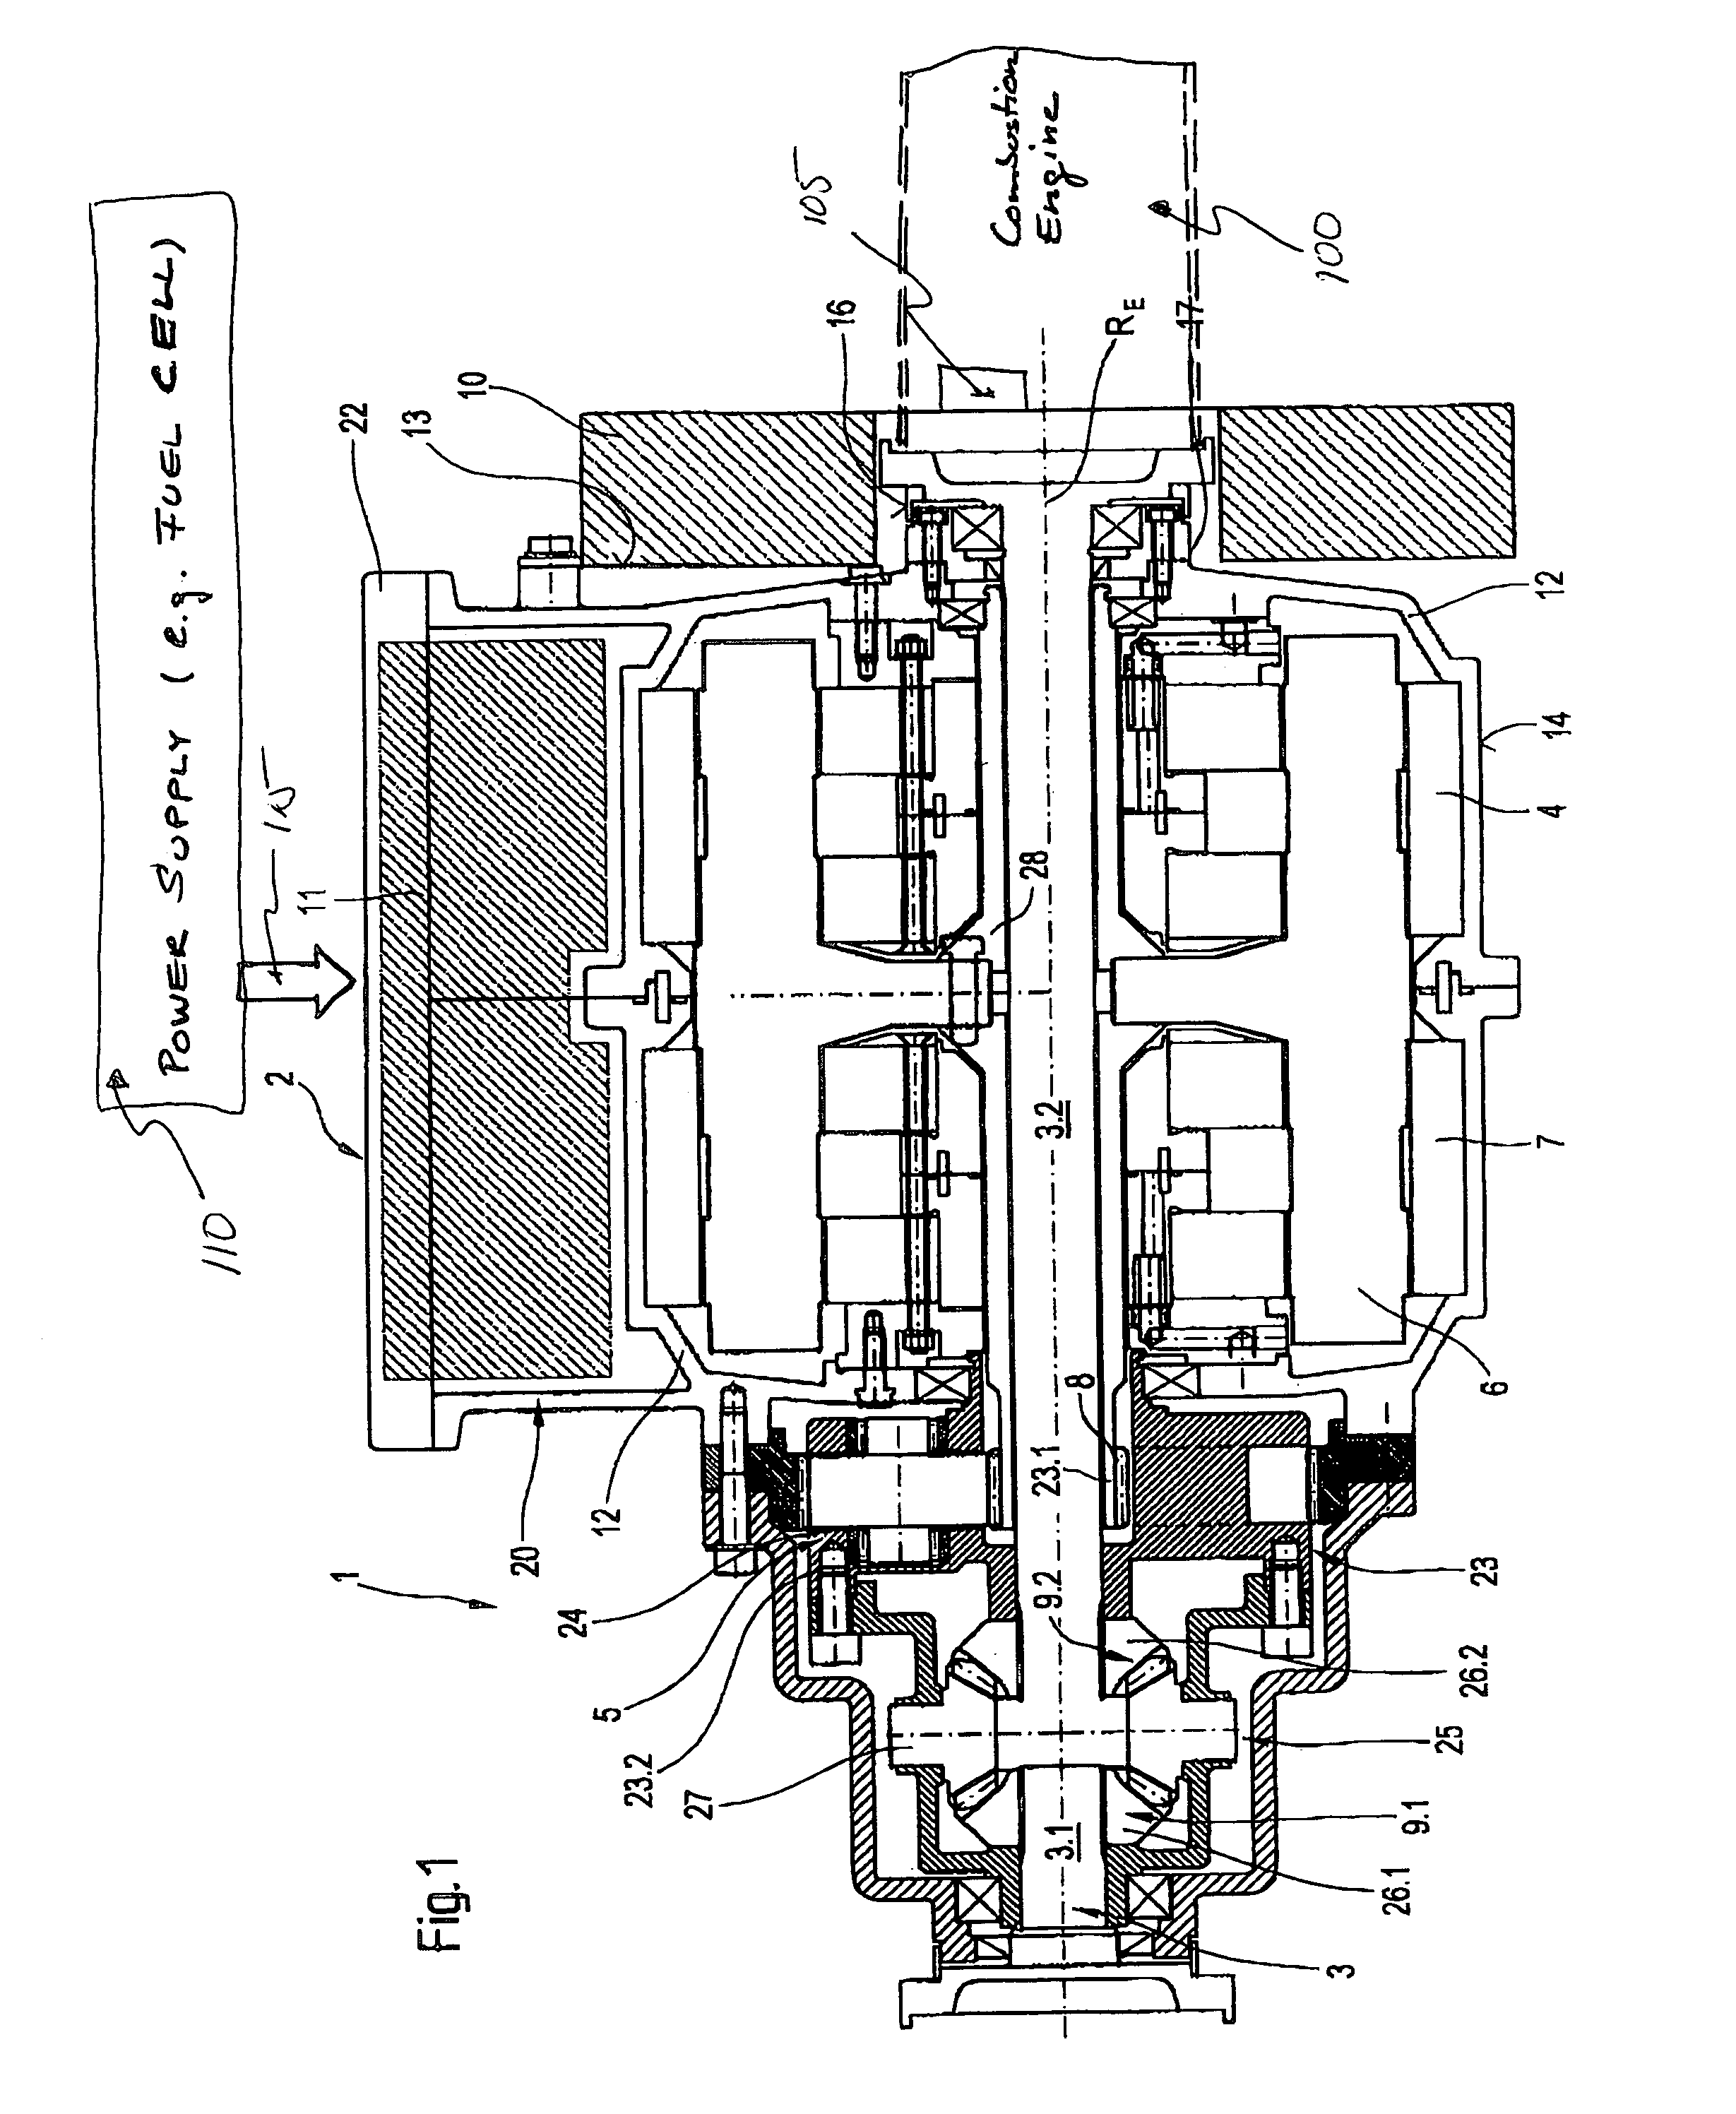 Shaft drive unit, in particular an electrical drive unit for driving a wheel shaft with a transverse shaft structure